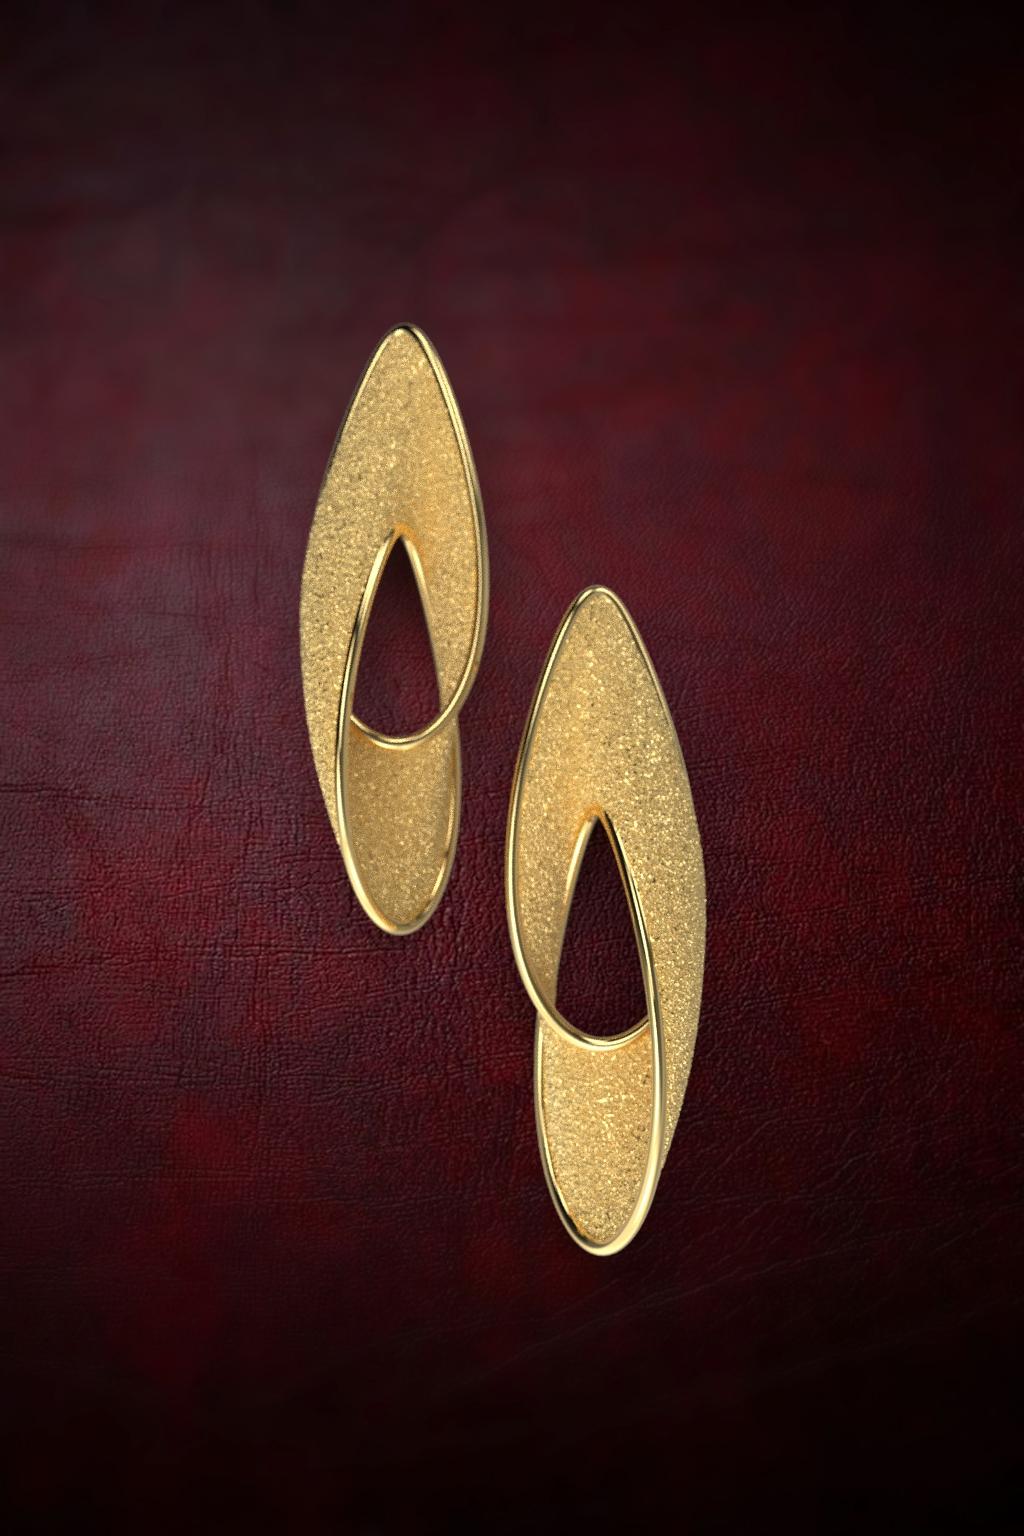 Made to order 14k yellow gold earrings.
Contemporary Statement Earrings in solid gold 14k,  Italian fine jewelry made in Italy, long stud earring, modern and elegant earrings.
Length: 39 Millimeters; Width: 11.5 Millimeters
The earrings are secured